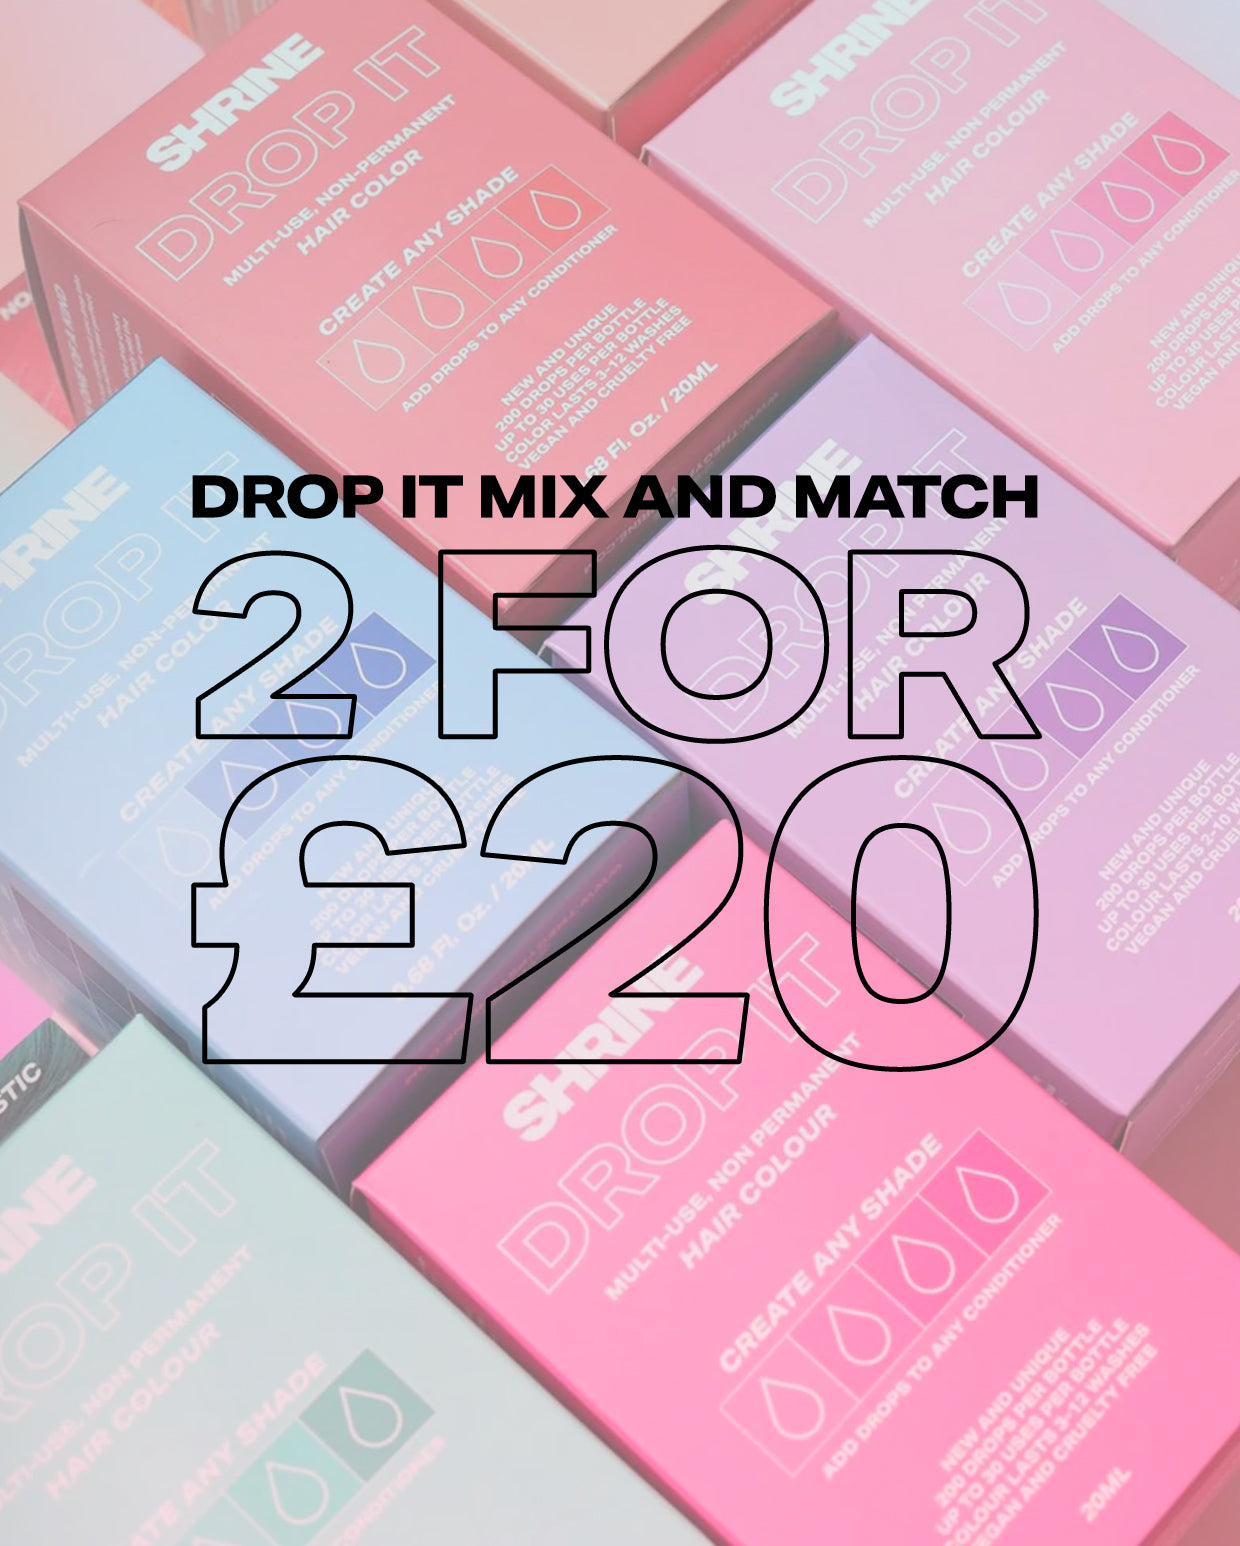 DROP IT Mix & Match 2 for £20